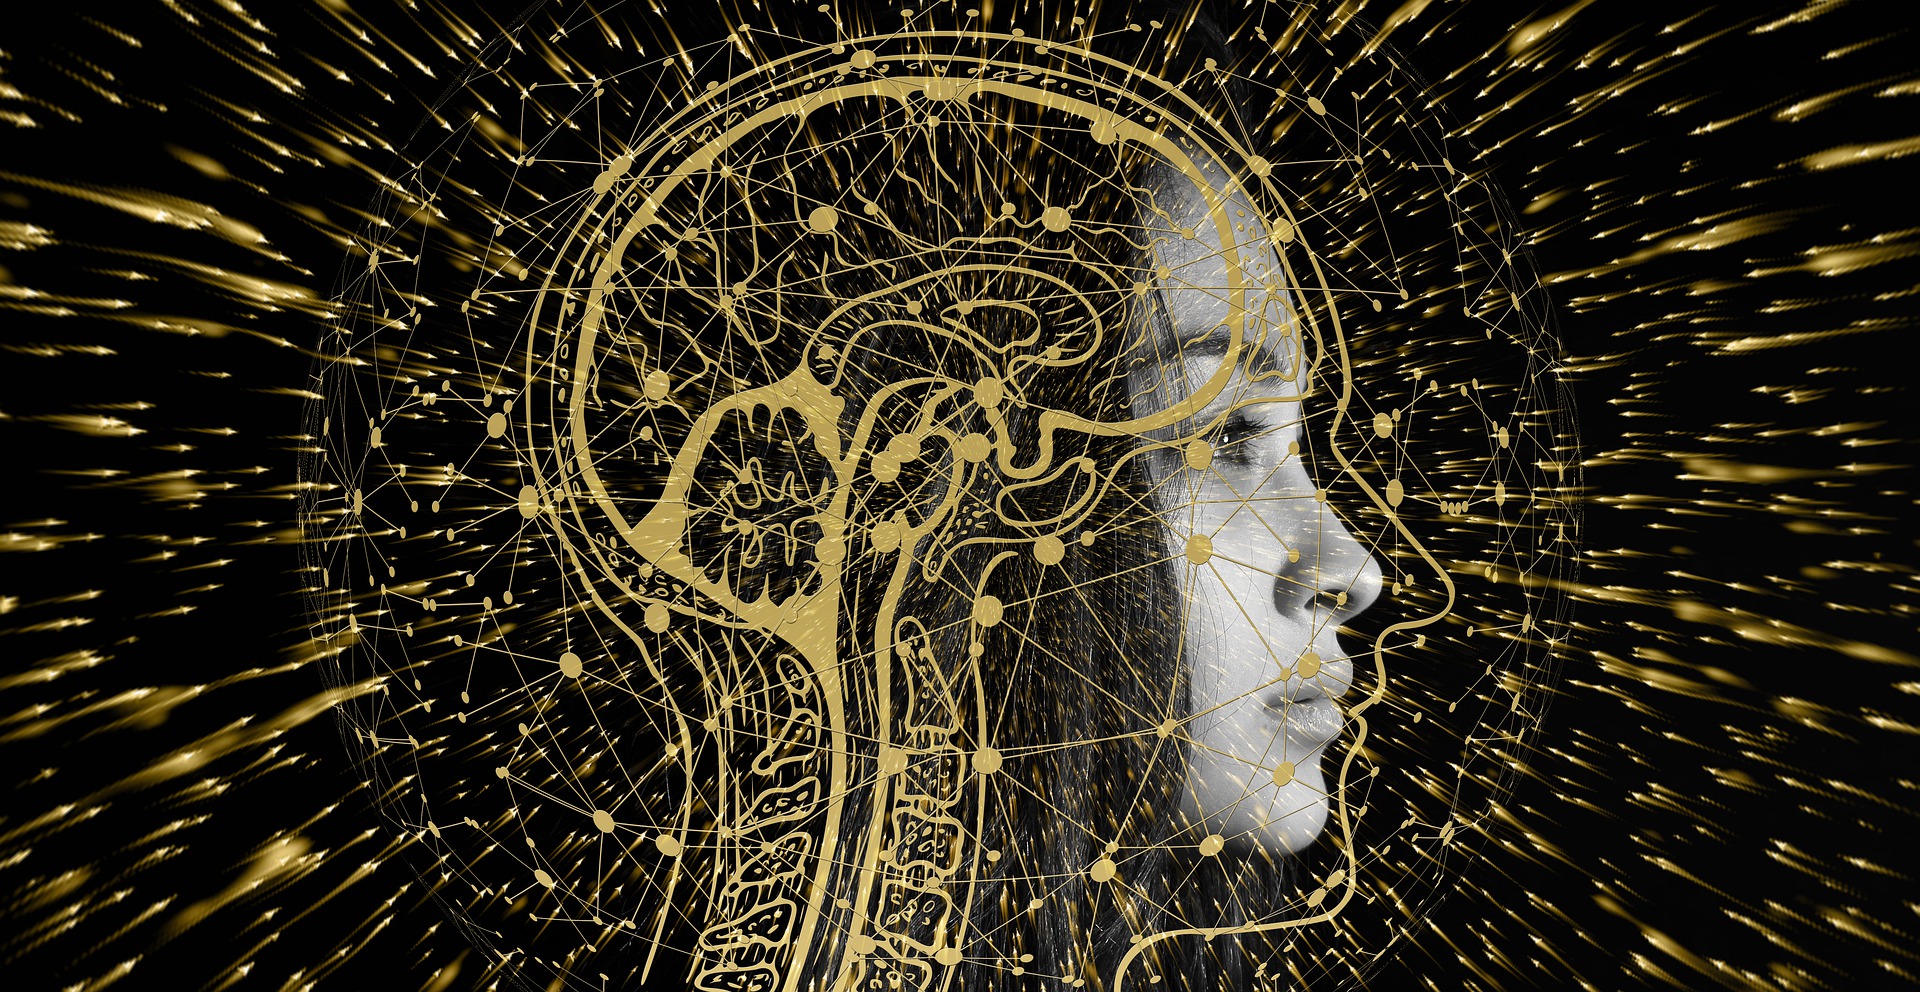 Black and gold diagram of the brain incorporating a black-and-white photo of a woman's face